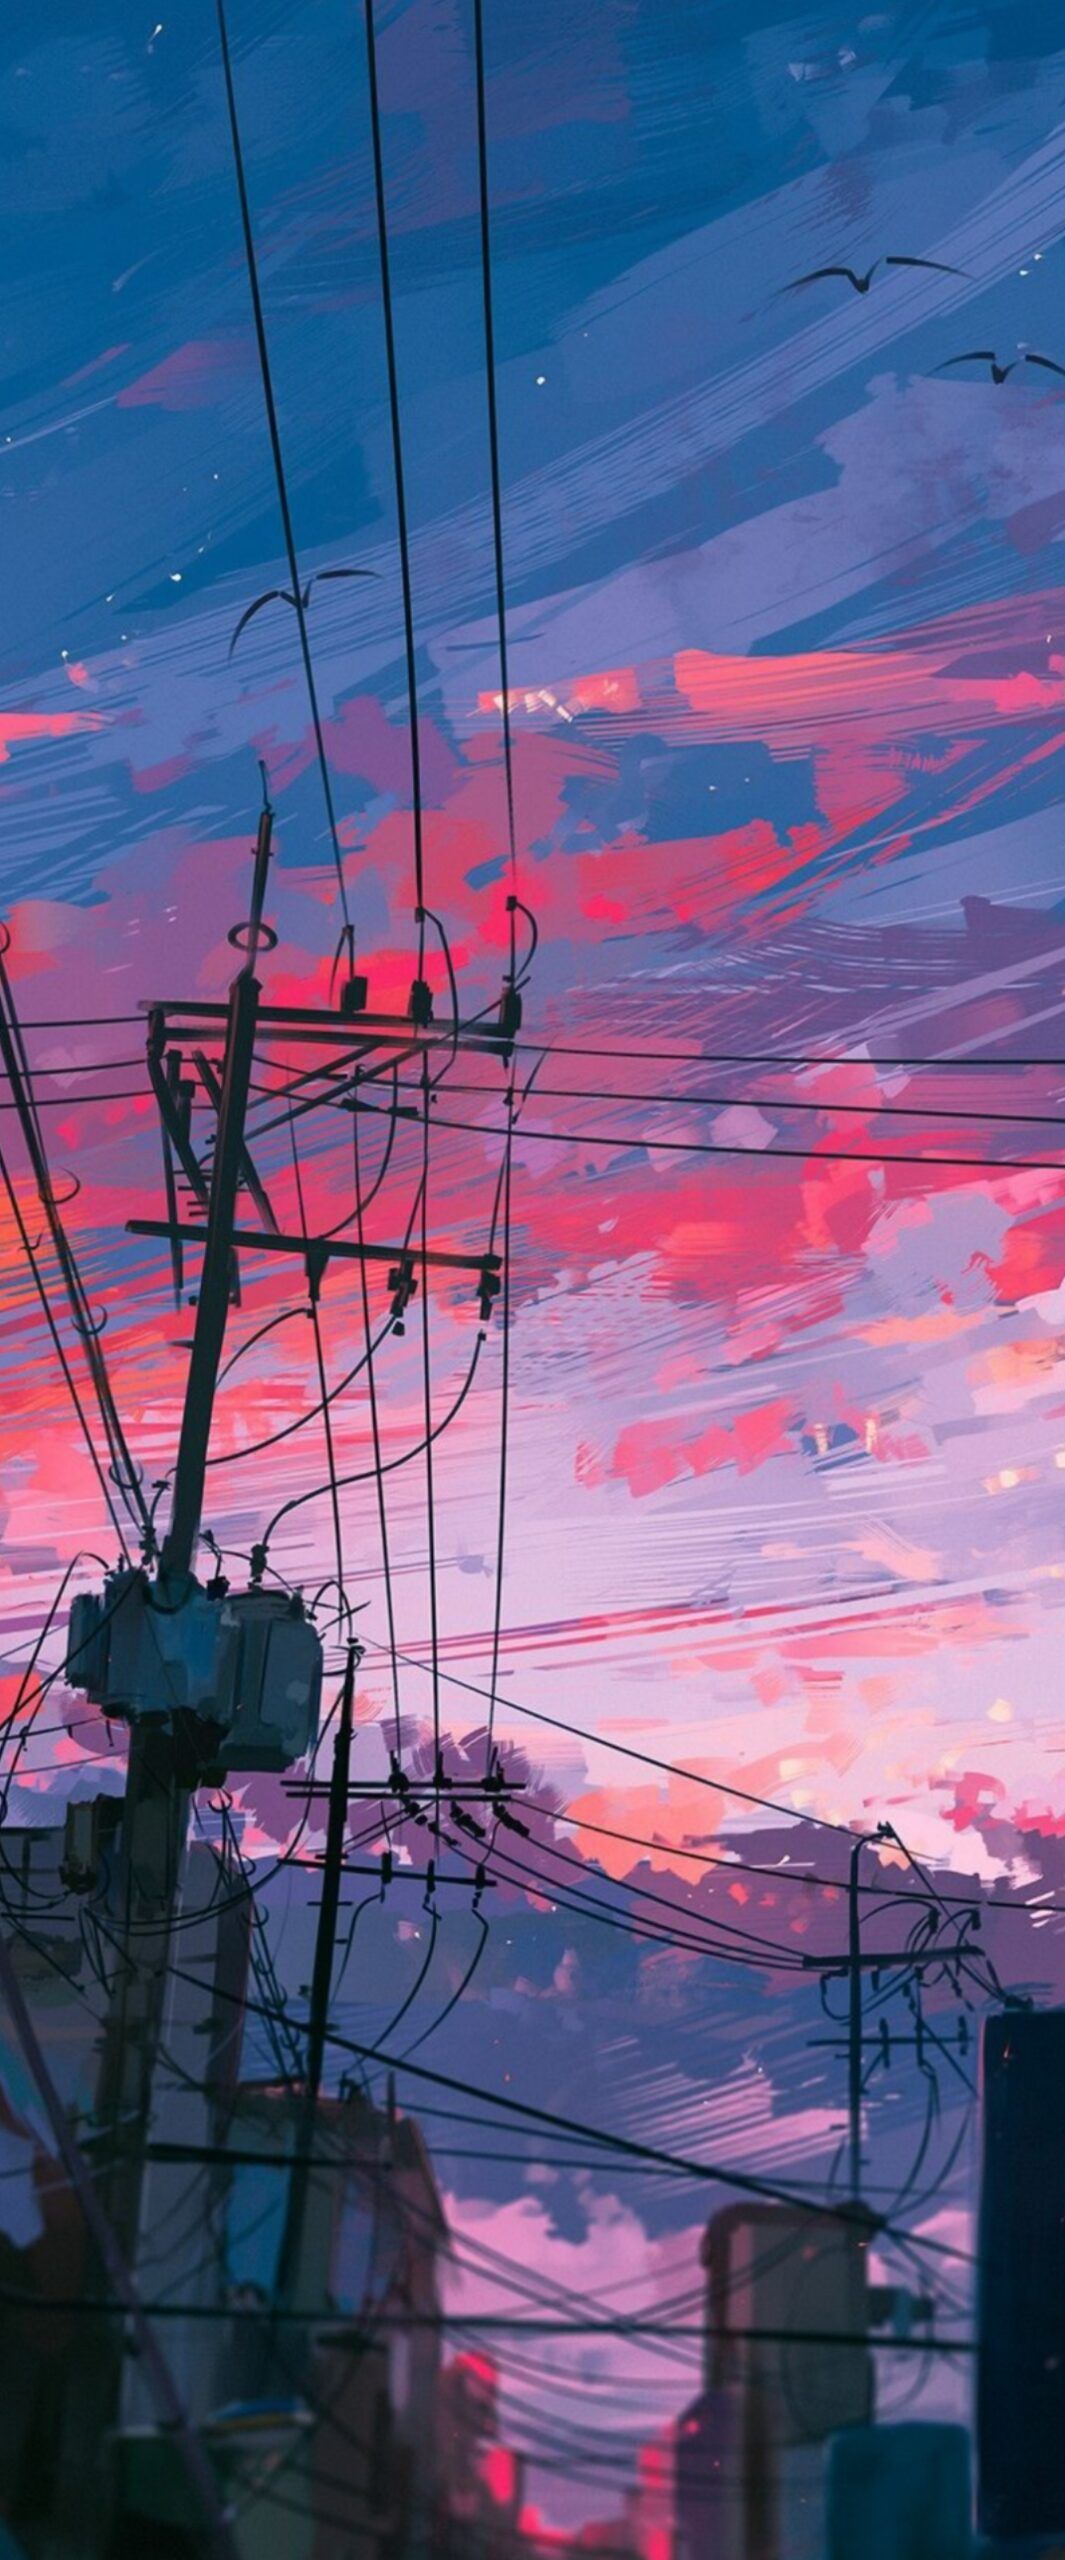 Aesthetic anime scenery wallpaper of power lines under a pink and blue sky - Anime landscape, scenery